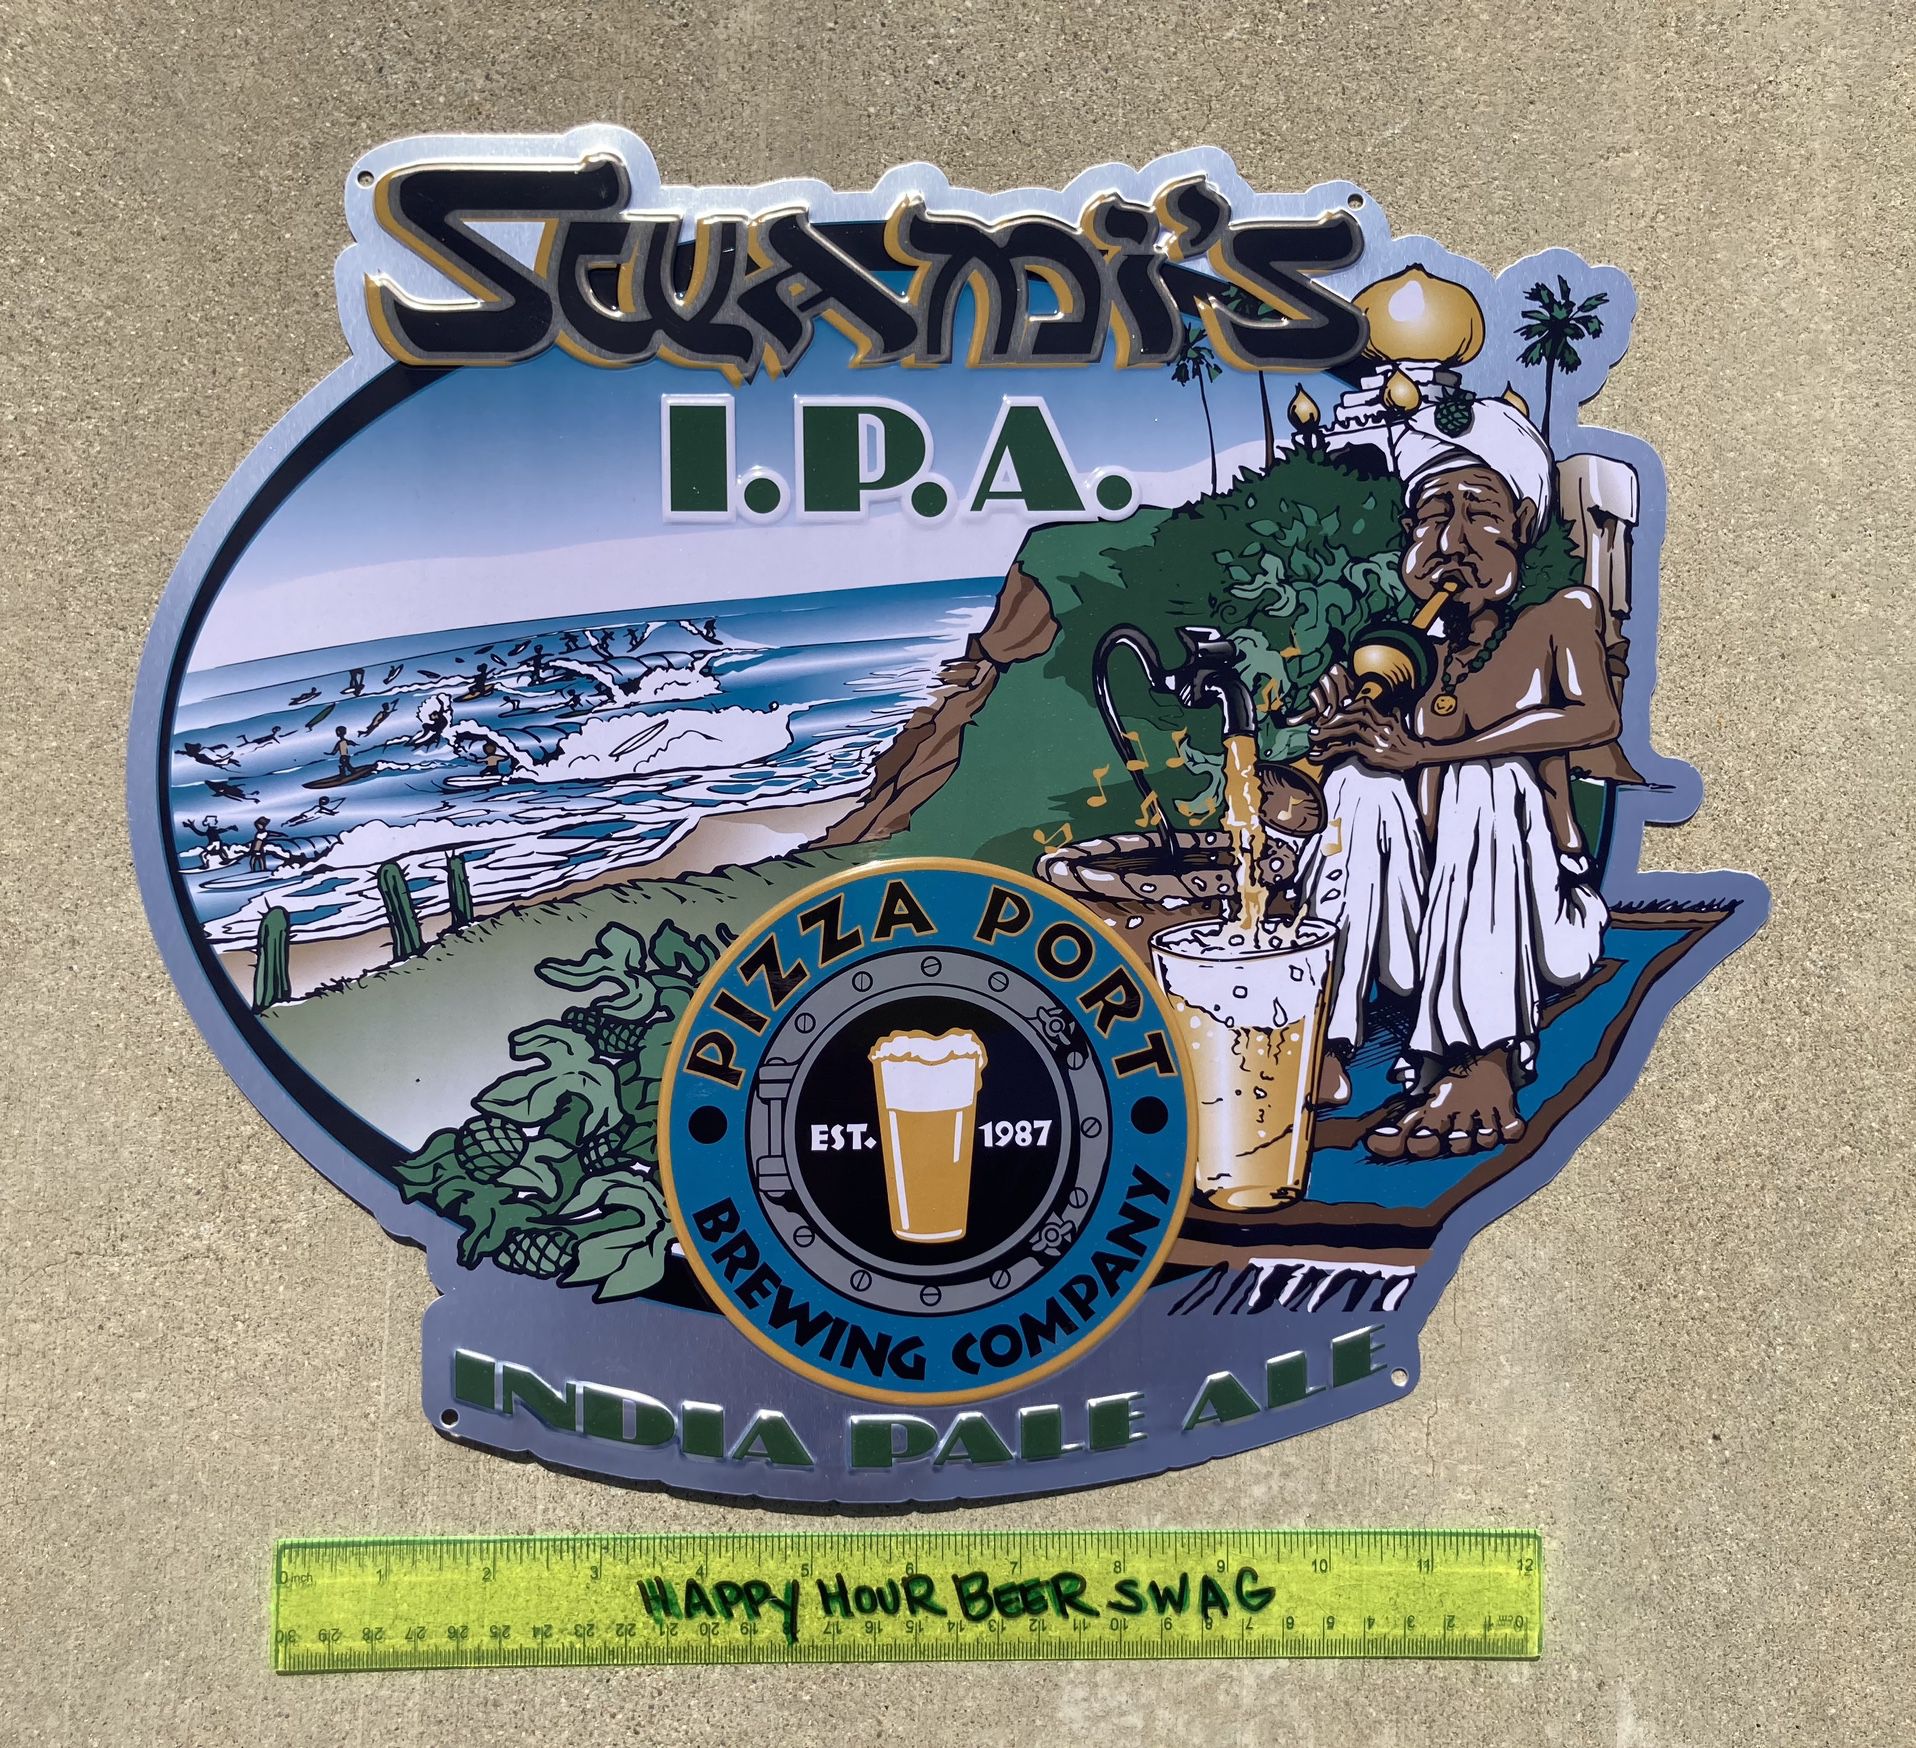 🔥 Rare Mint Condition Pizza Port Swami’s IPA Metal Beer Bar Tin Sign 